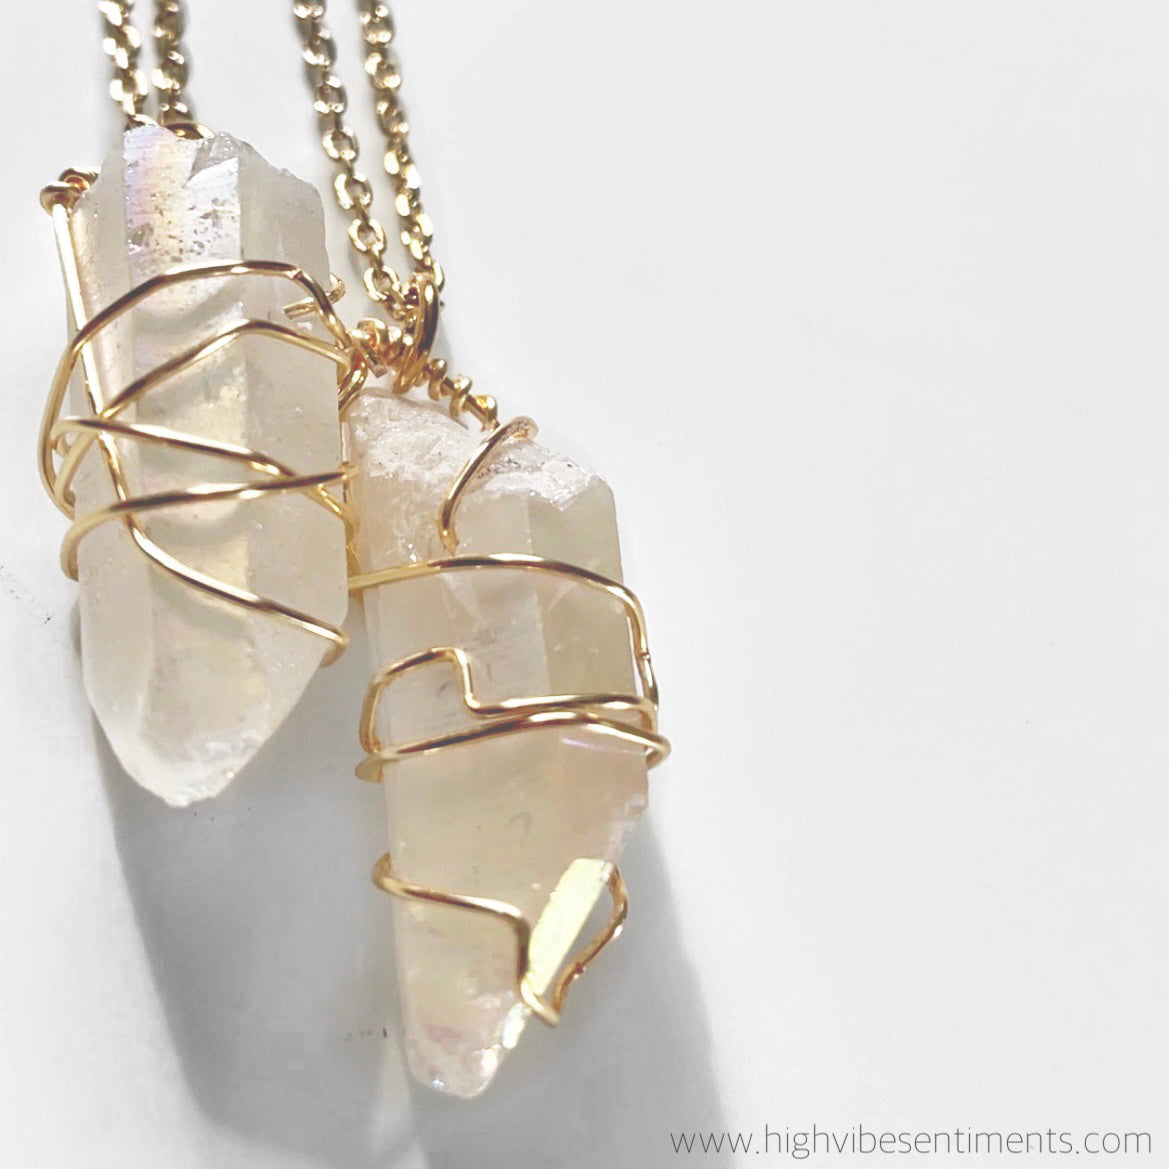 Quartz Crystal Necklace - Wire Wrapped Quartz Crystals on Sterling Silver  Chain - Melissa Abram